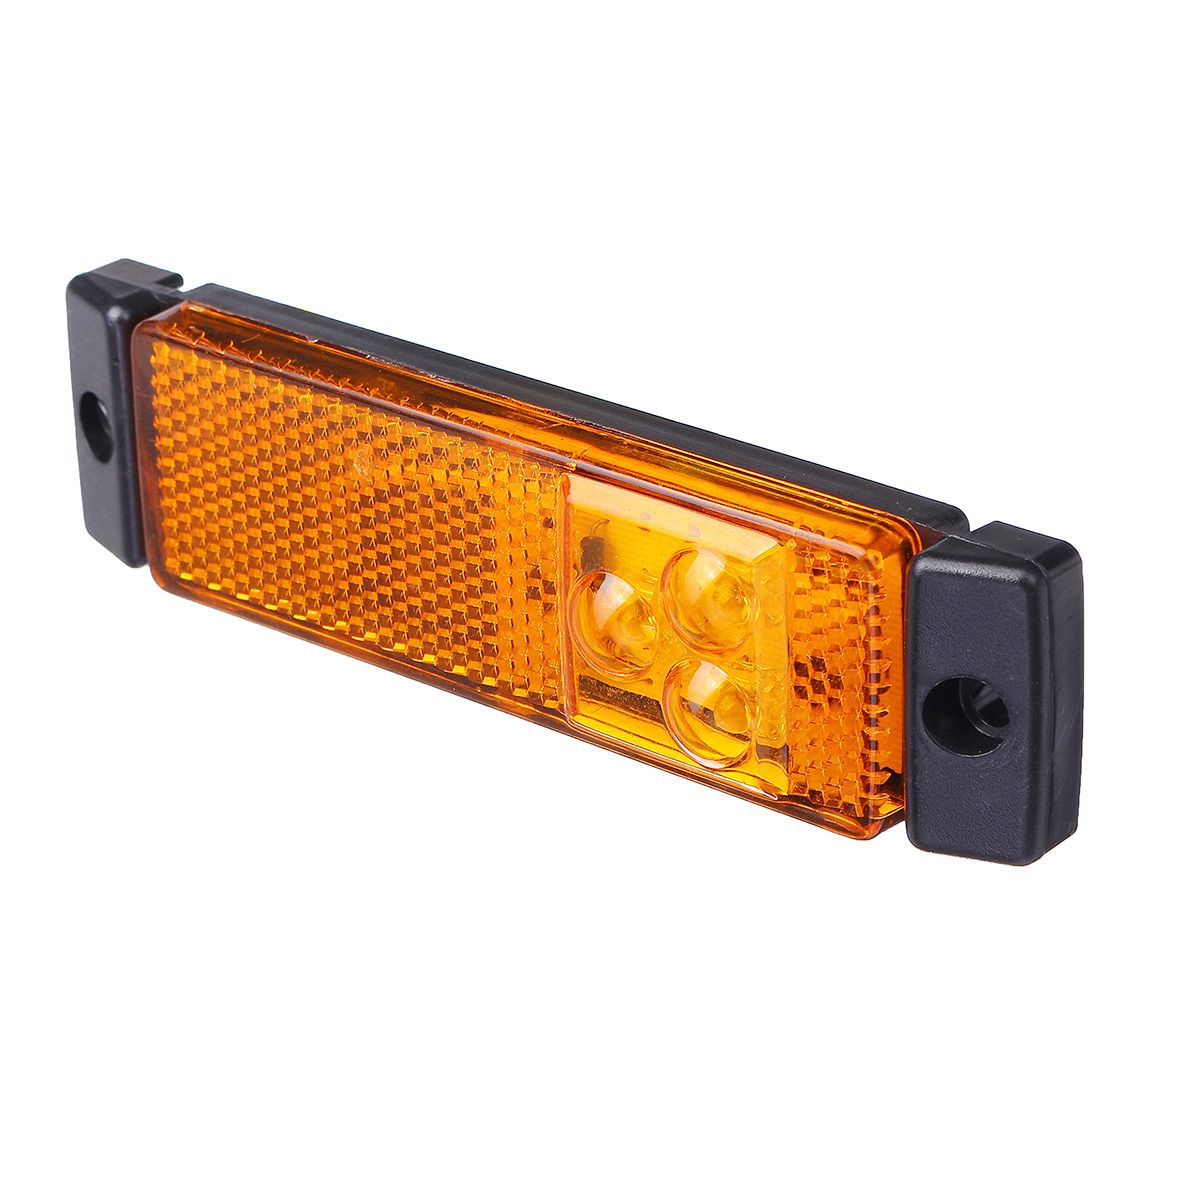 3-LED-Side-Marker-Lights-with-Rear-Reflector-Indicator-12-24V-AmberRedWhite-For-Truck-Lorry-Trailer-1603836